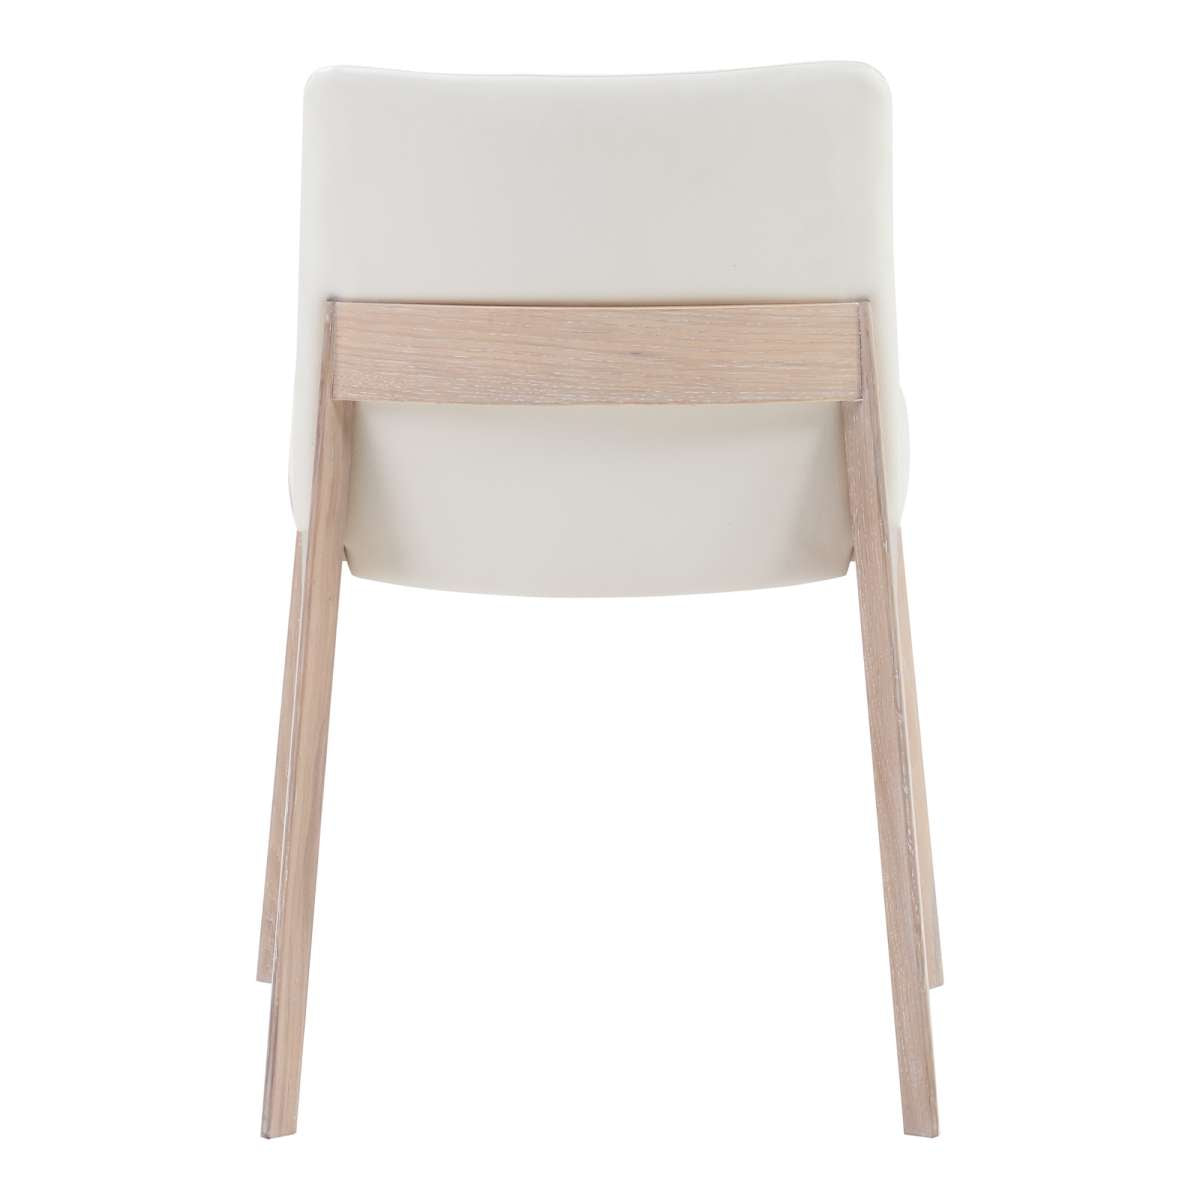 Deco Oak Dining Chair White Pvc-M2 (Set Of 2) By Moe's Home Collection